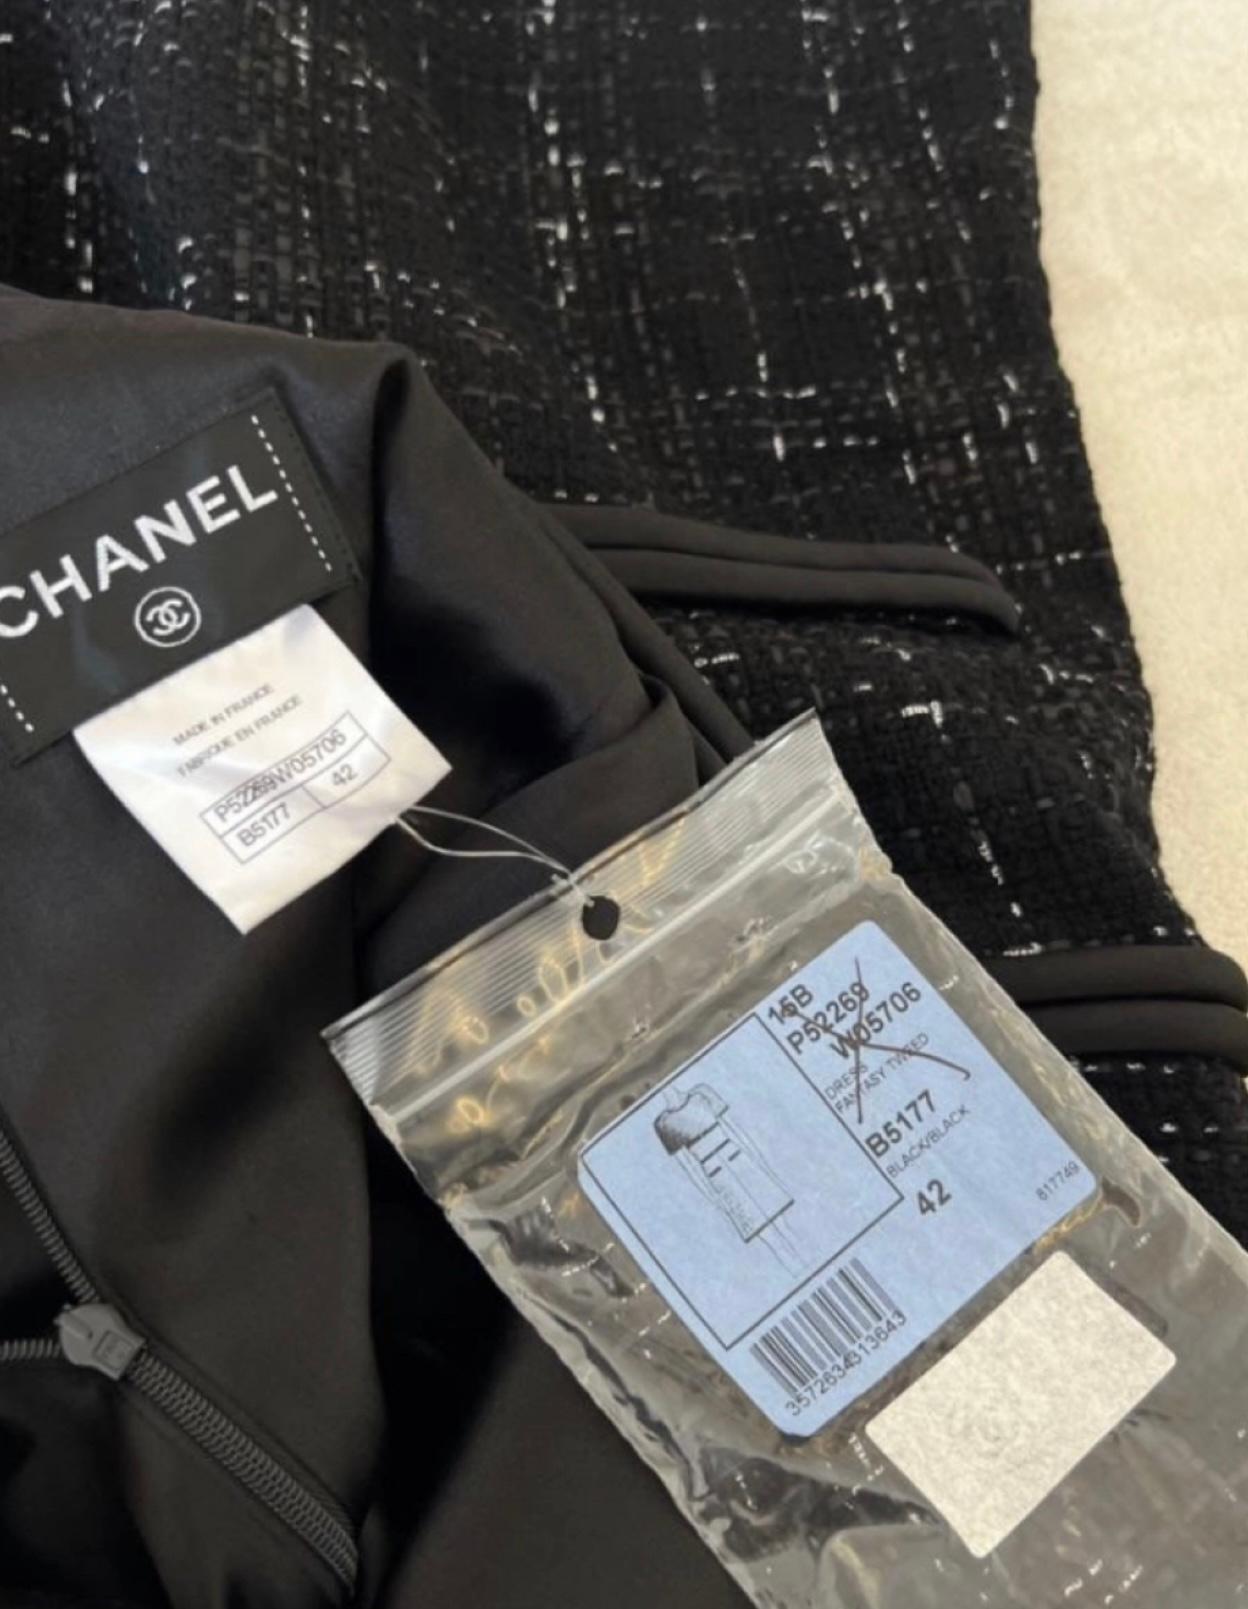 Chanel black tweed dress with CC logo charm at pocket.
Size mark 42 FR, tags attached